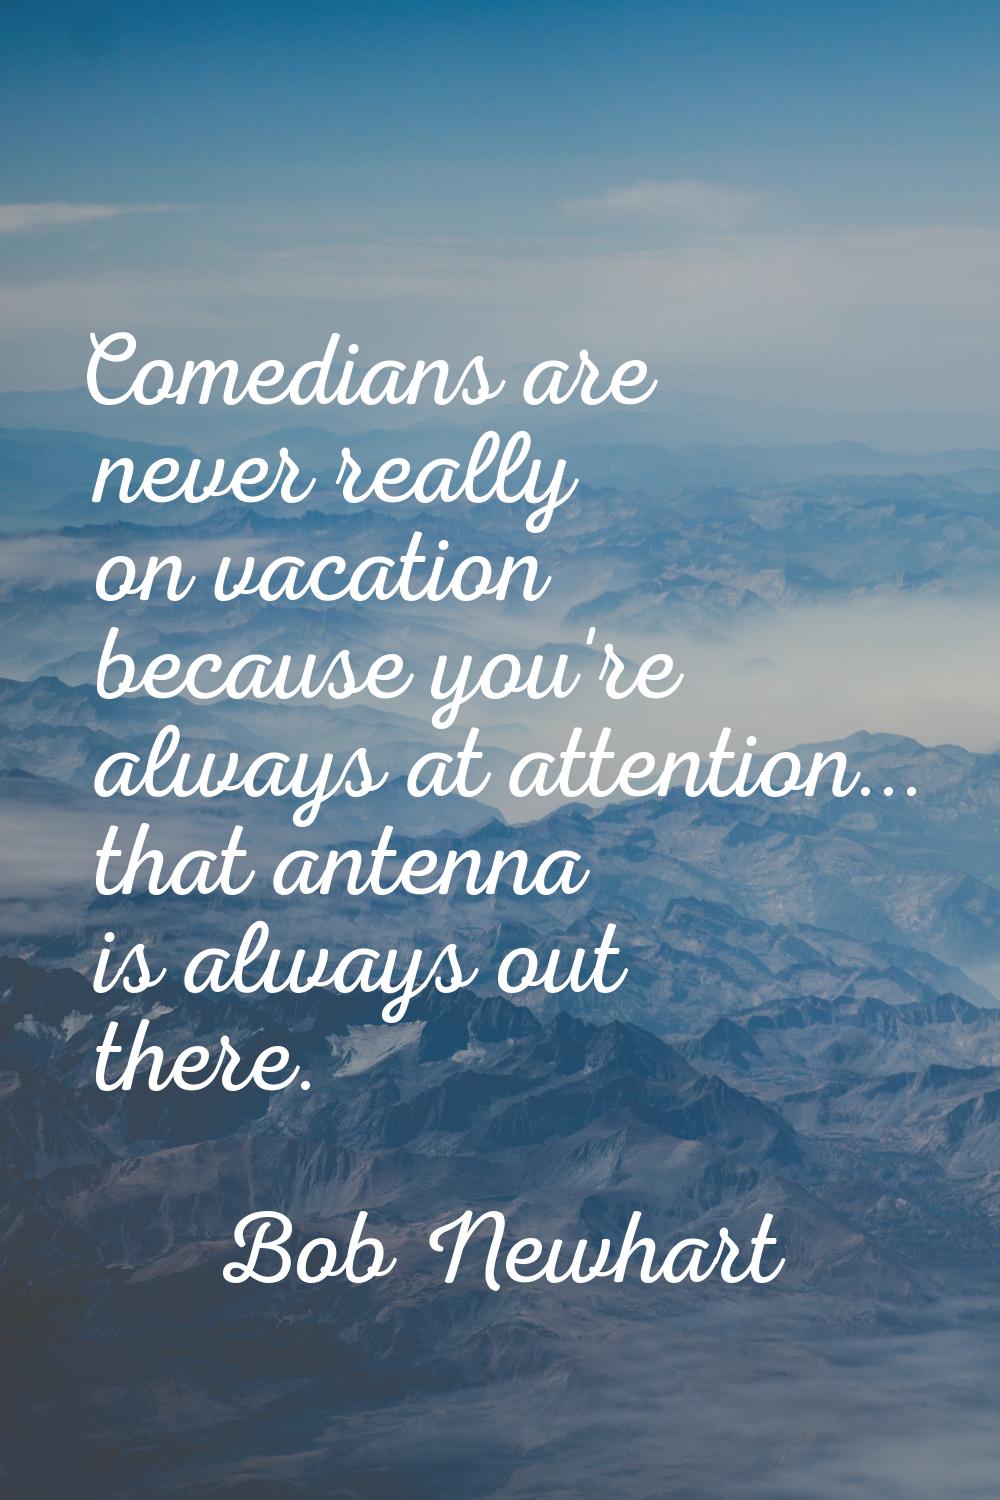 Comedians are never really on vacation because you're always at attention... that antenna is always